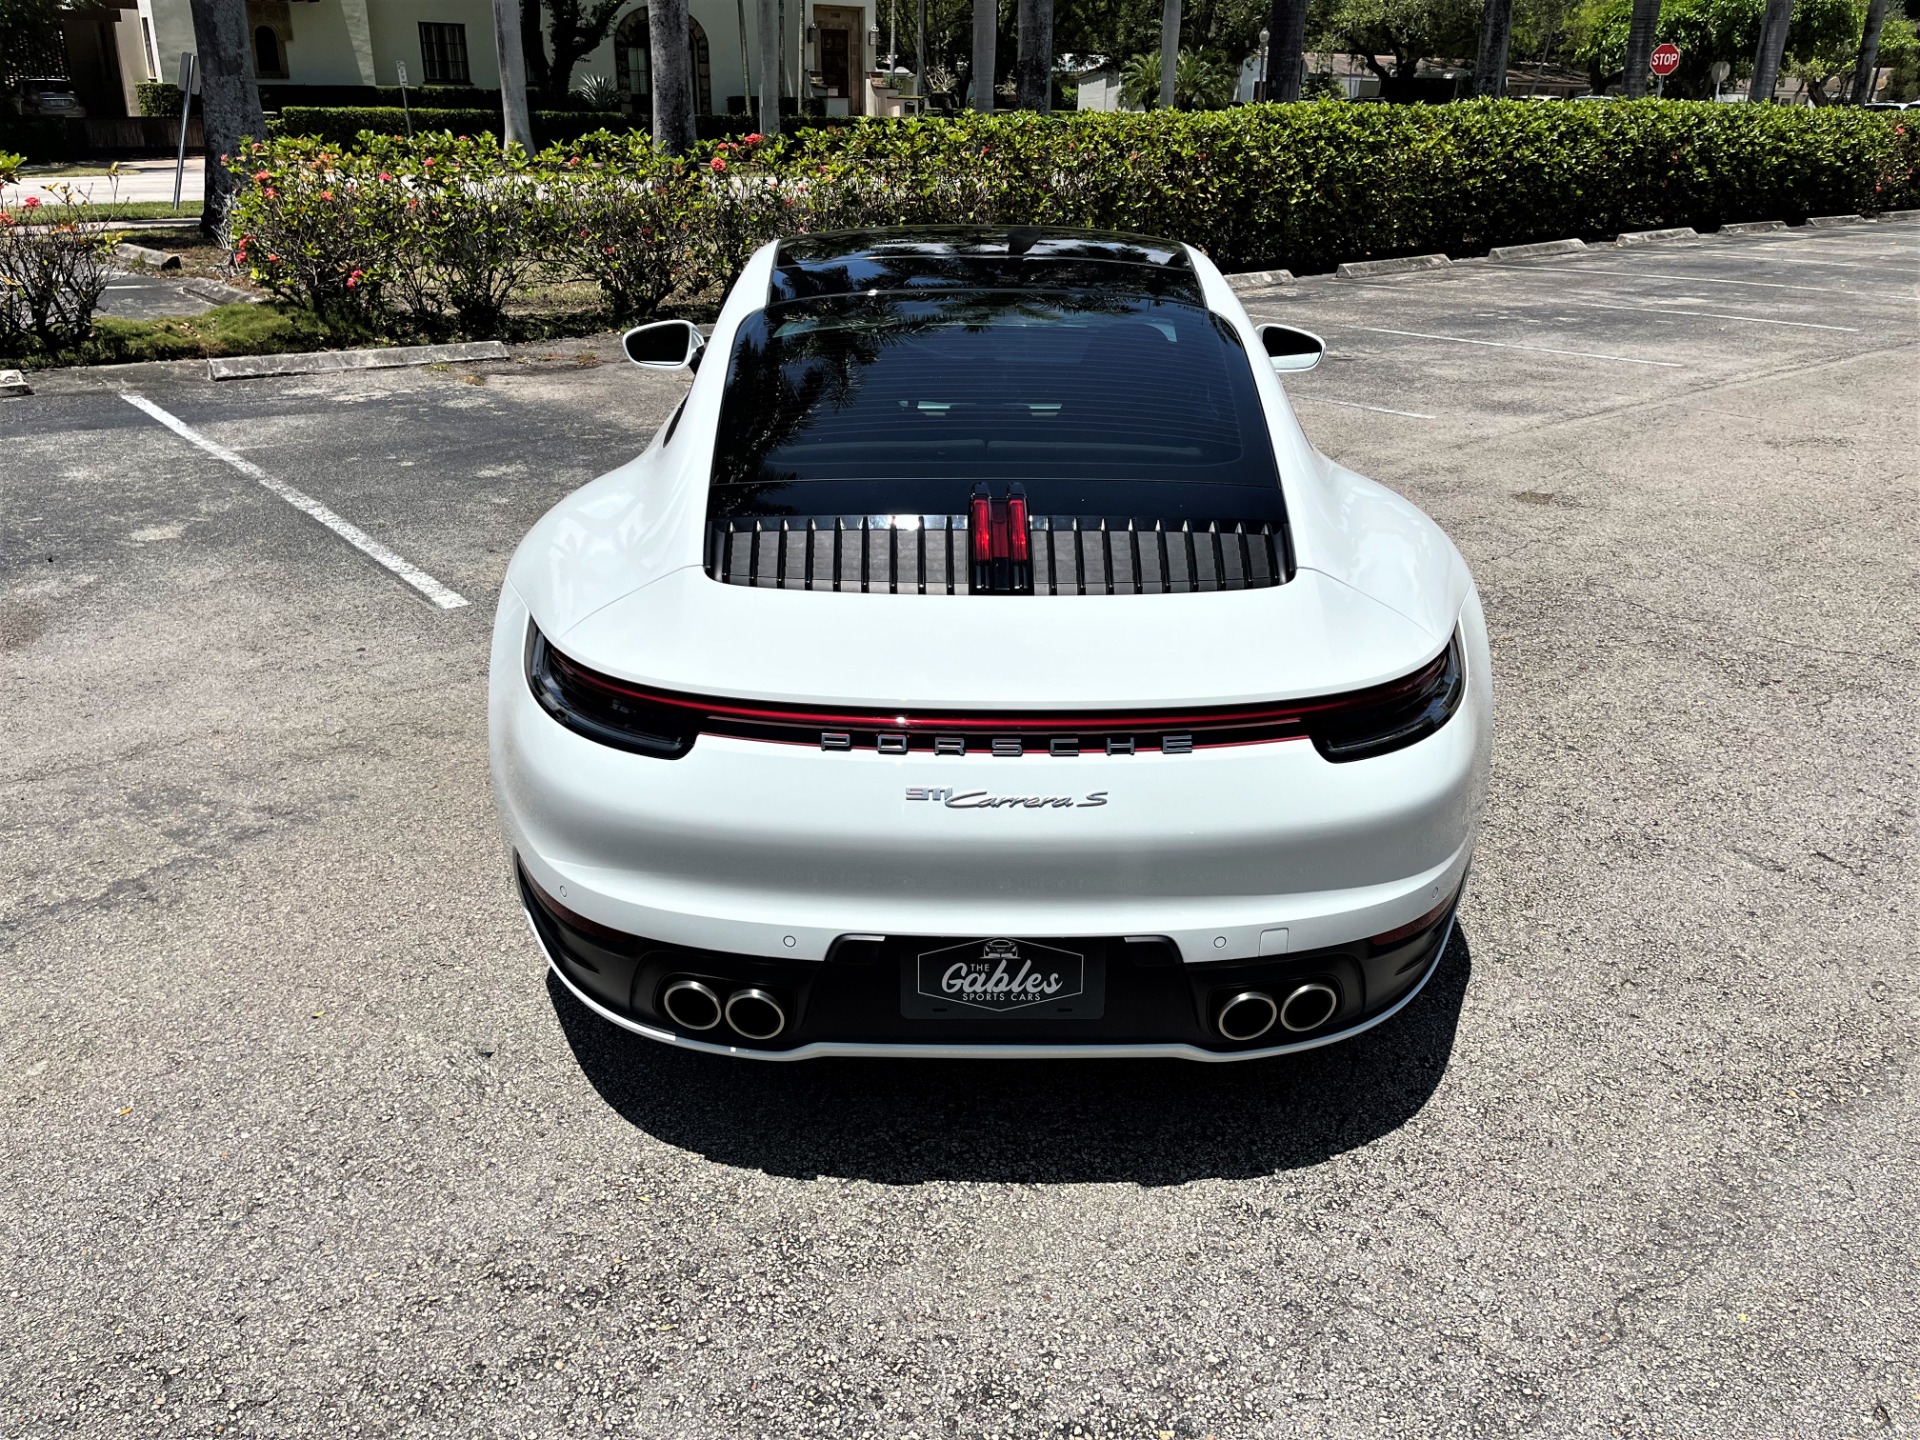 Used 2020 Porsche 911 Carrera S for sale Sold at The Gables Sports Cars in Miami FL 33146 4